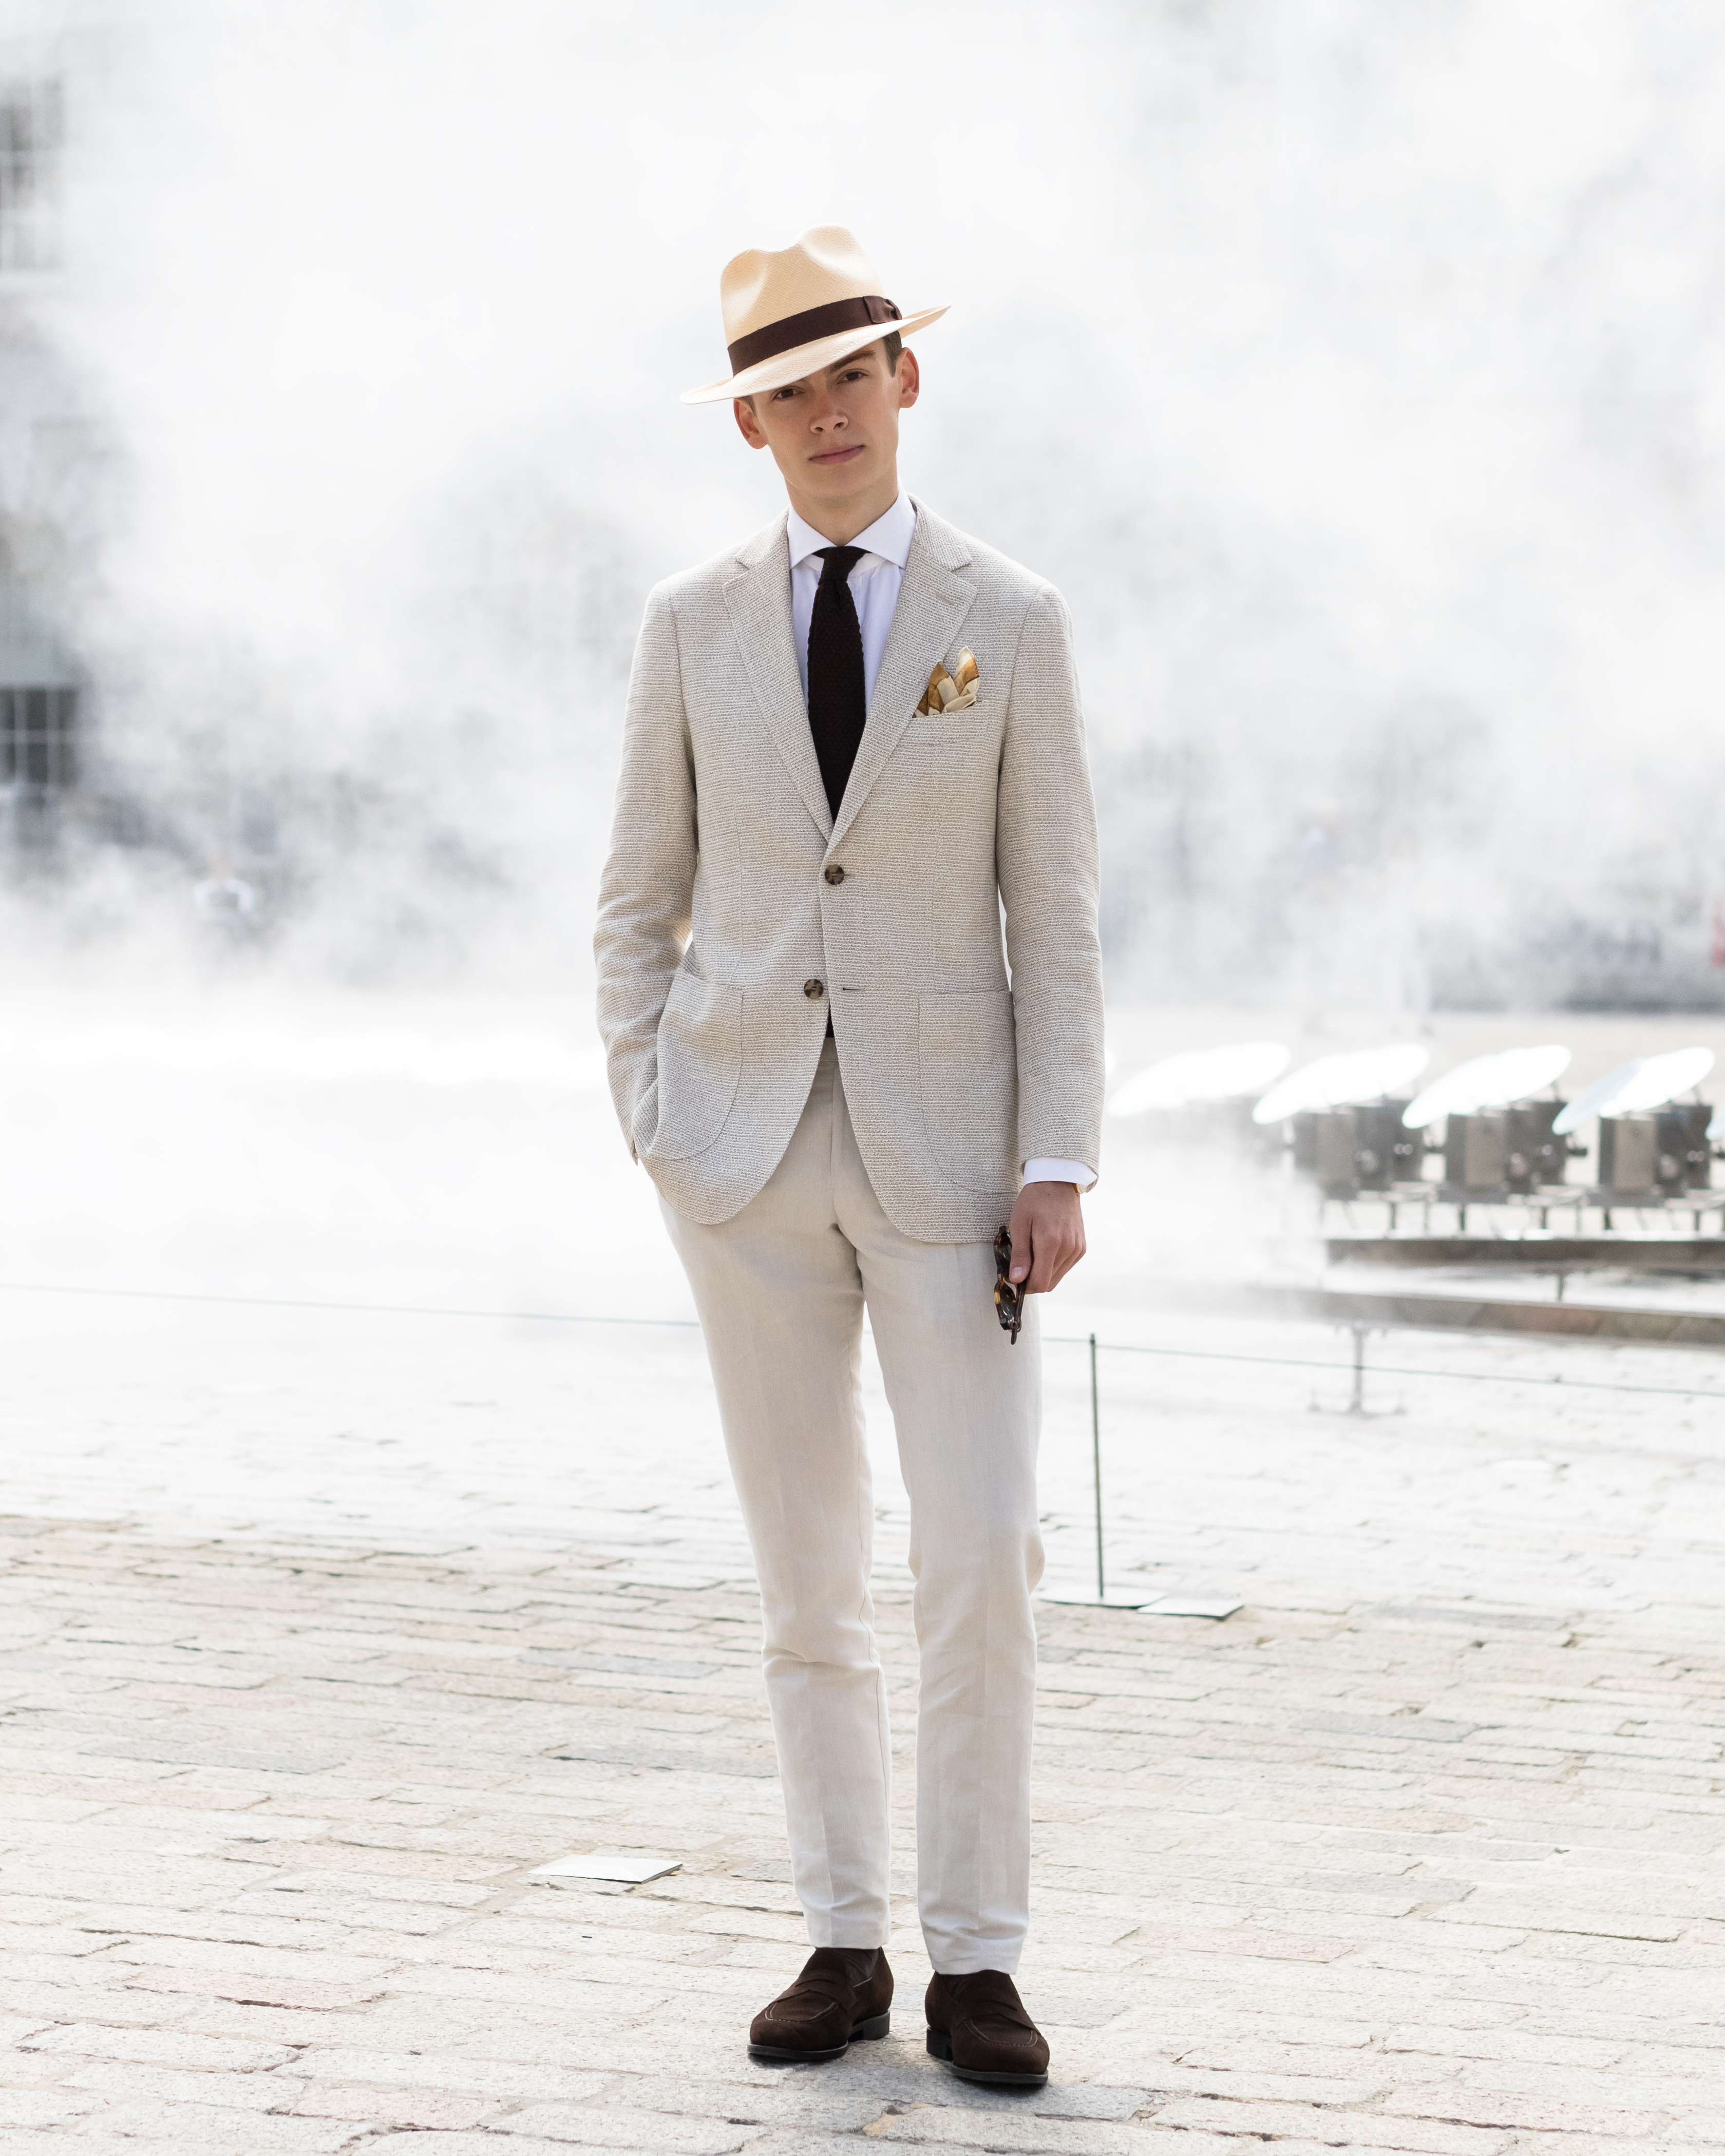 mathias le Fèvre attending London fashion week men's SS19 wearing jacket white Eton brown knit tie, light brown pocket square from Eton and a light brown pair of trousers in a linen cotton shirt emon eyewear sunglasses laird hatters Alfred Panama carmine shoemaker suede penny loafers